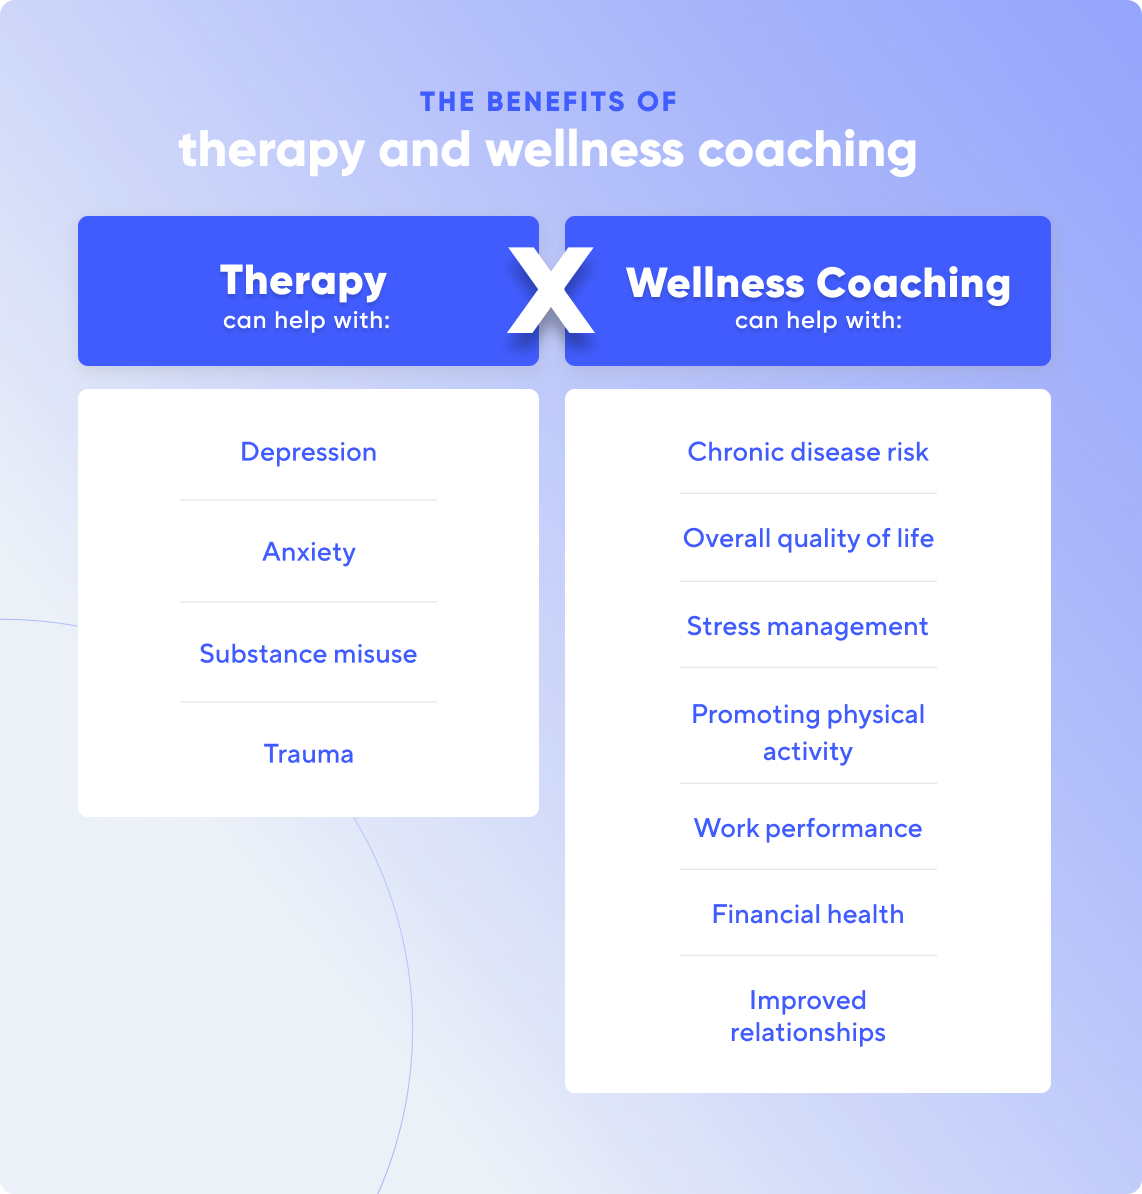 Therapy can help with depression, anxiety, substance misuse, and trauma while wellness coaching can help with chronic disease risk, quality of life, stress management, promoting physical activity, work performance, financial health, and improving relationships.